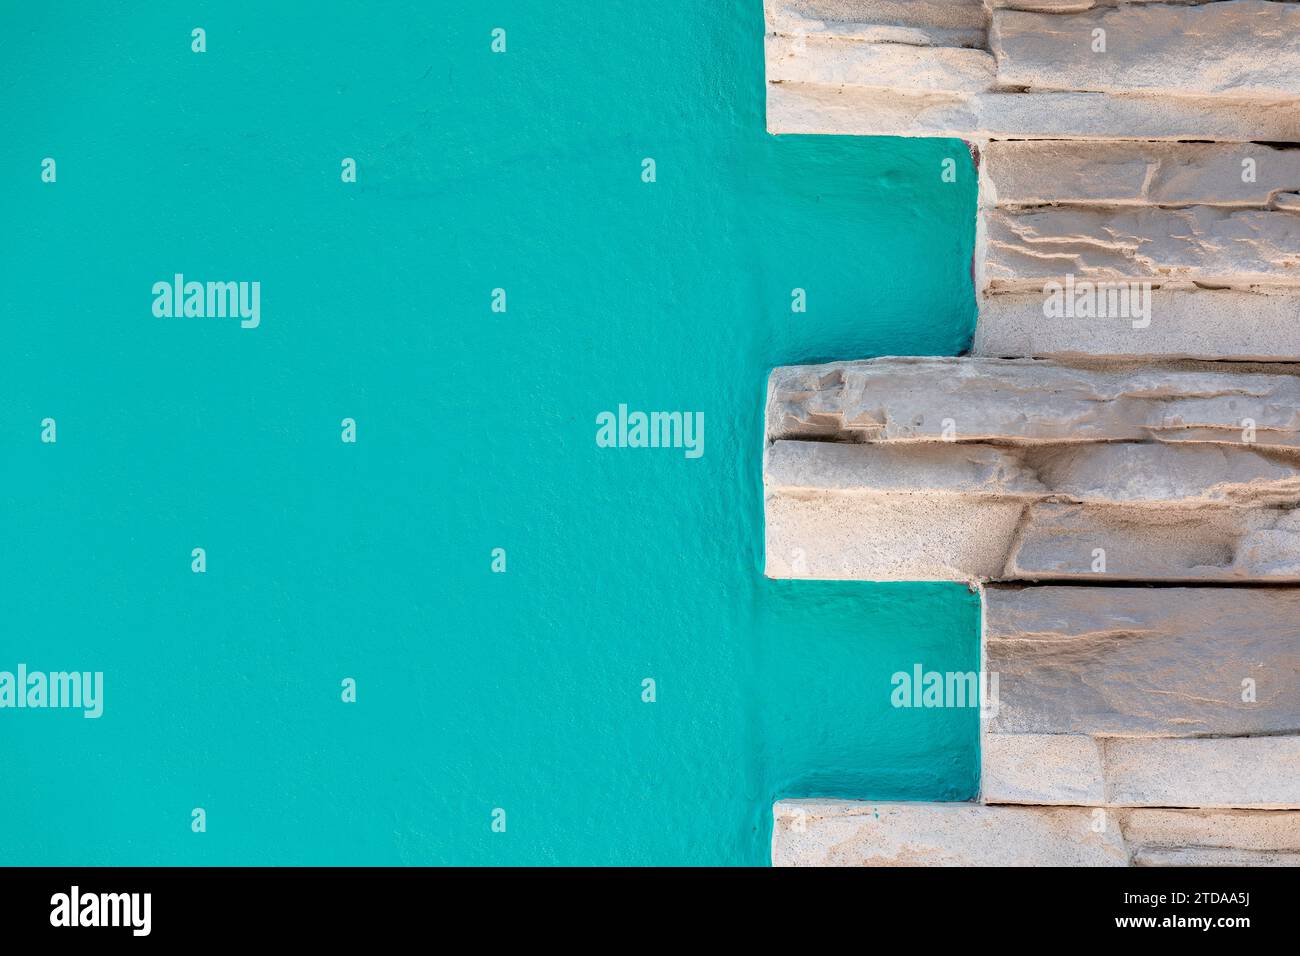 Turquoise Painted Wall Background Texture: Vibrant and Modern Surface for Slideshows and Presentations Stock Photo